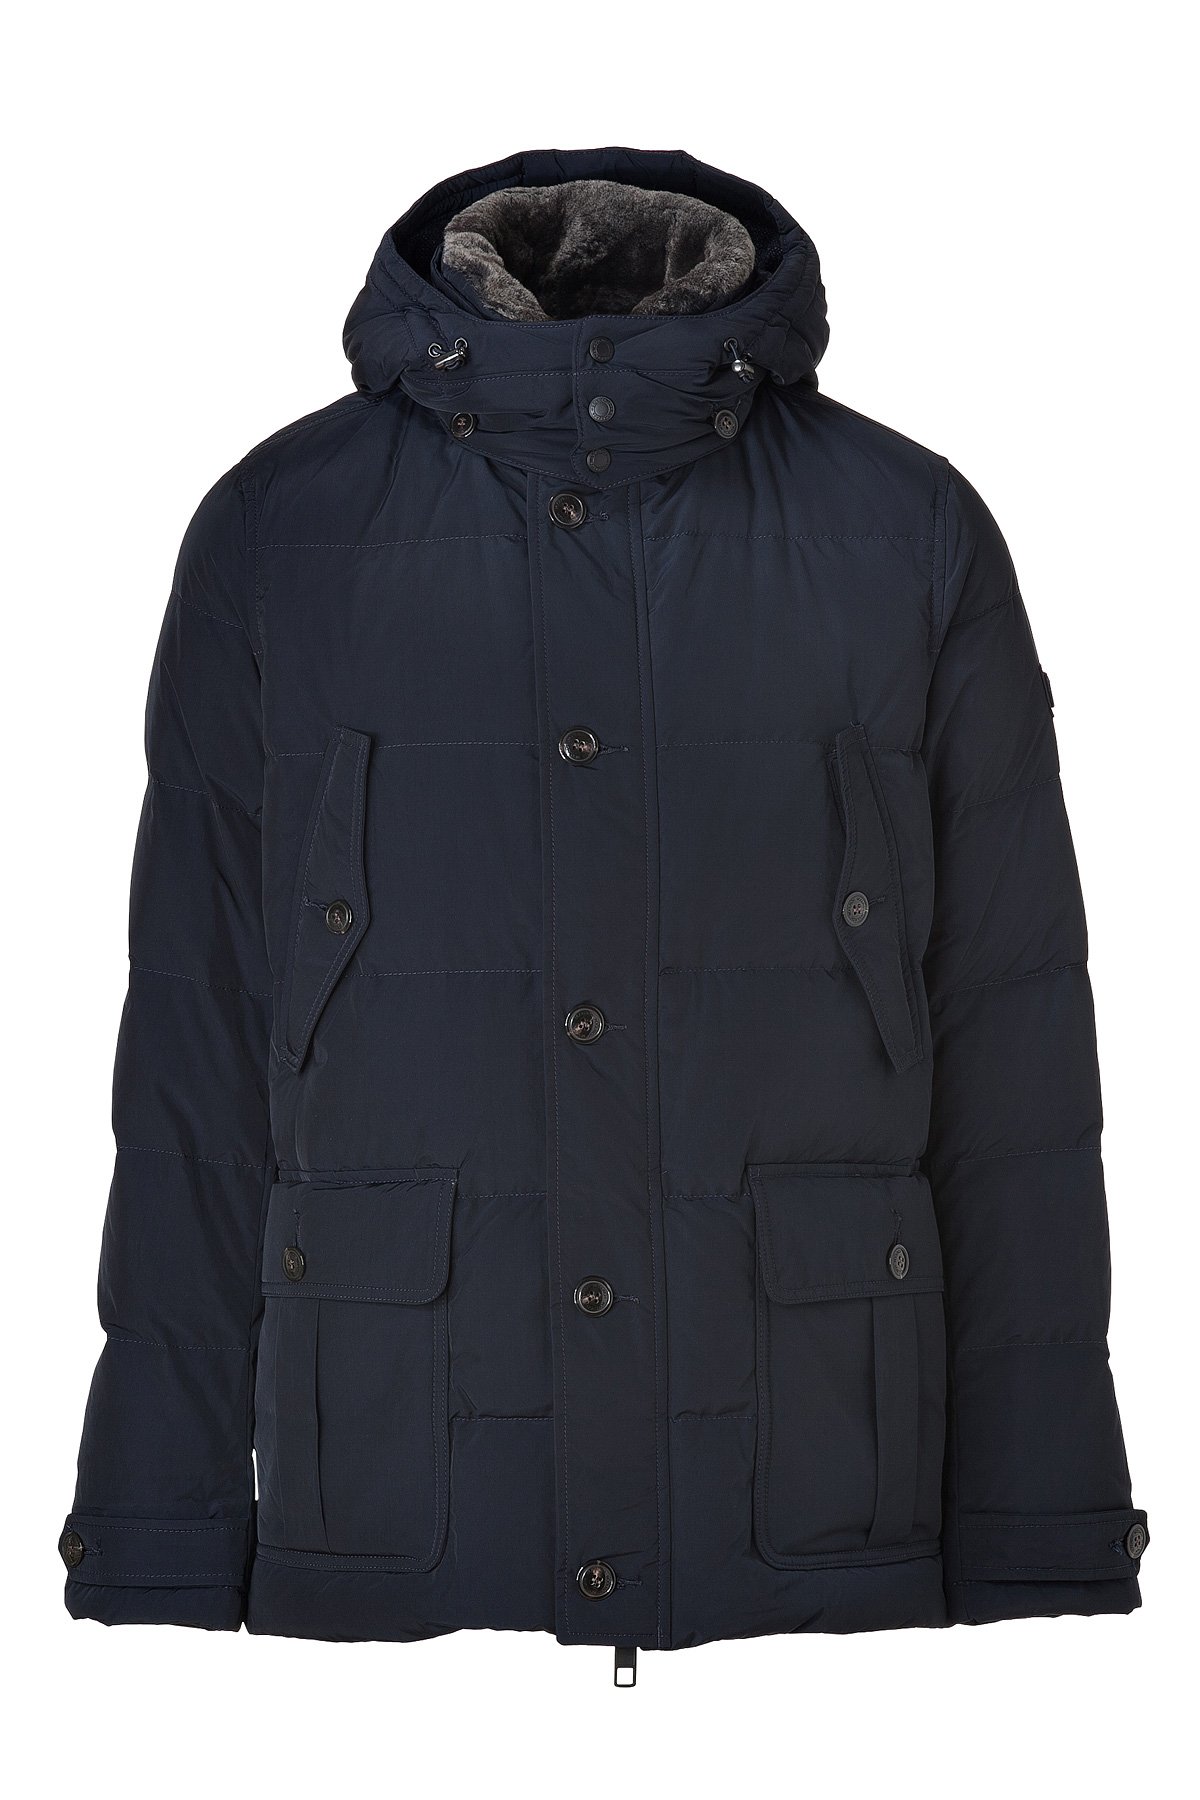 Lyst - Woolrich Classic Navy Pocono Down Parka in Blue for Men